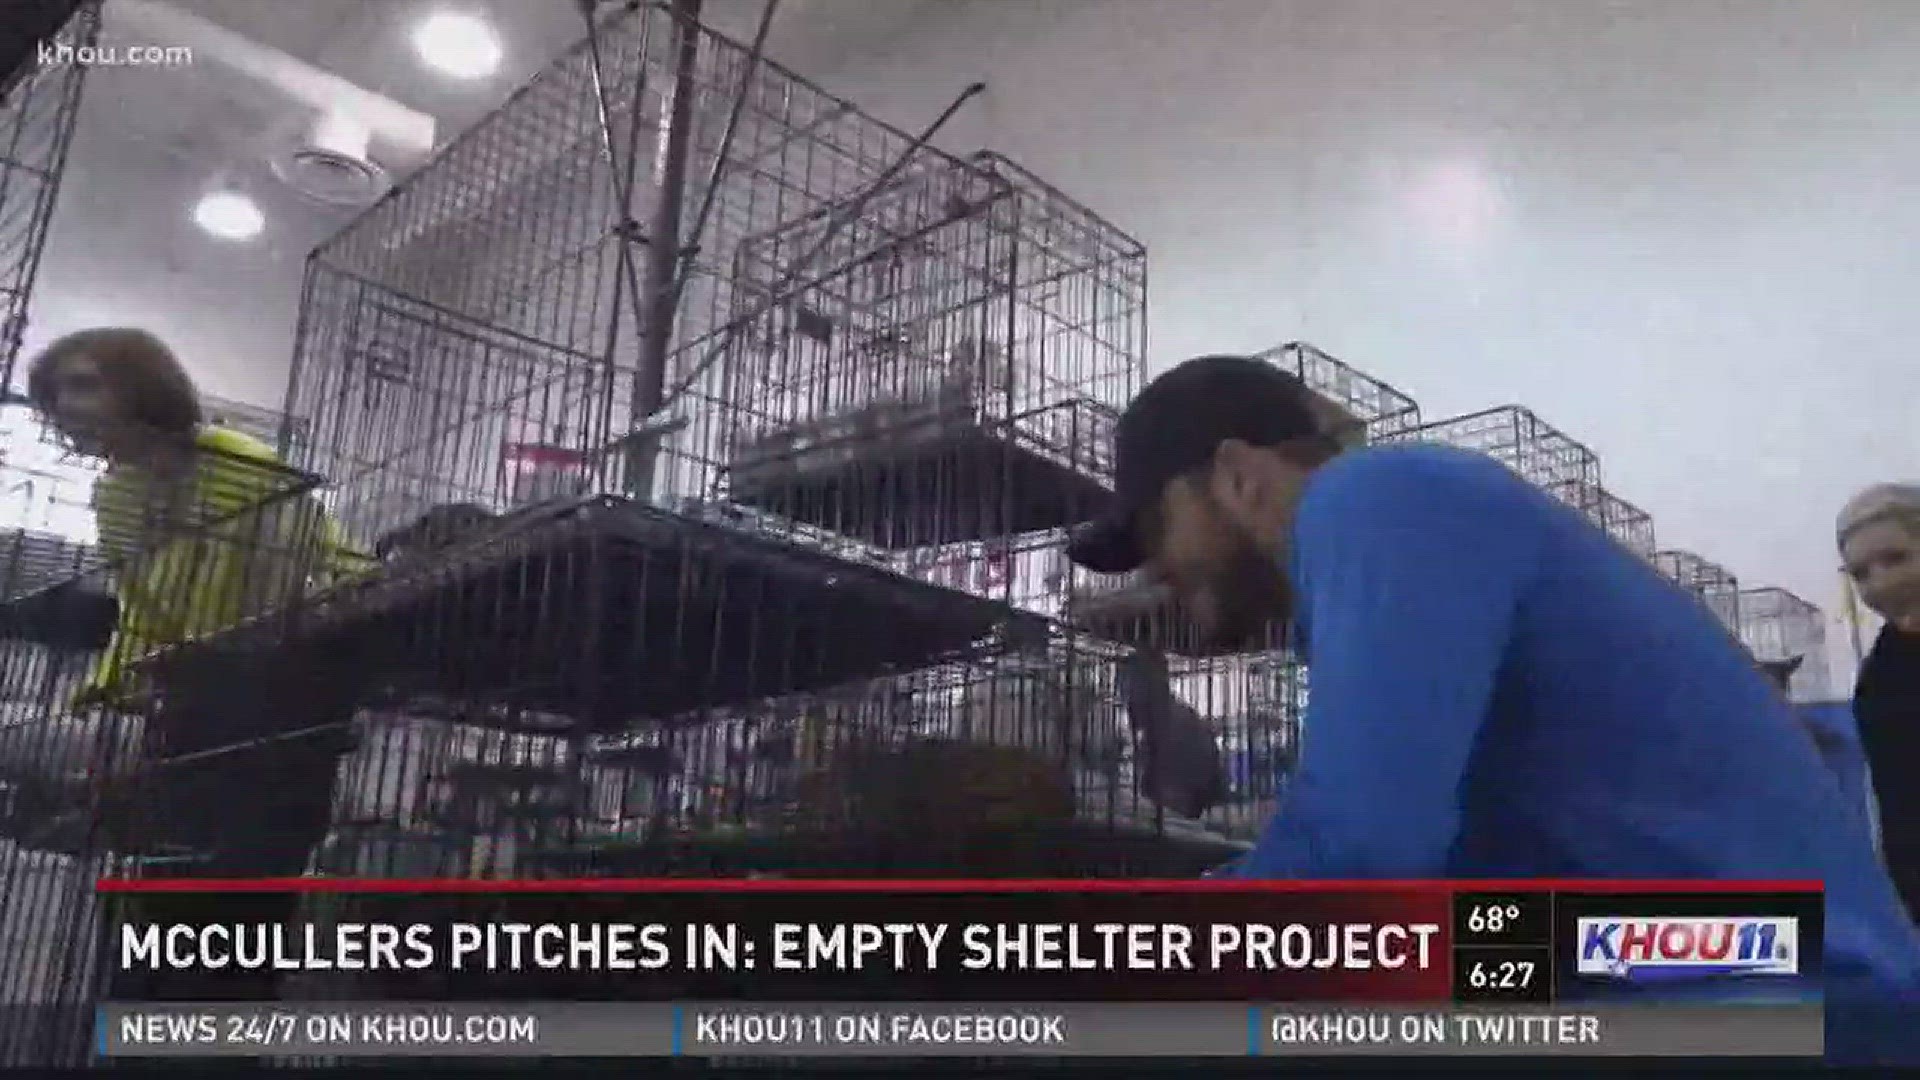 Houston Astros pitcher Lance McCullers was part of Houston's Empty Shelter Project, encouraging pet owners to spay and neuter their animals.